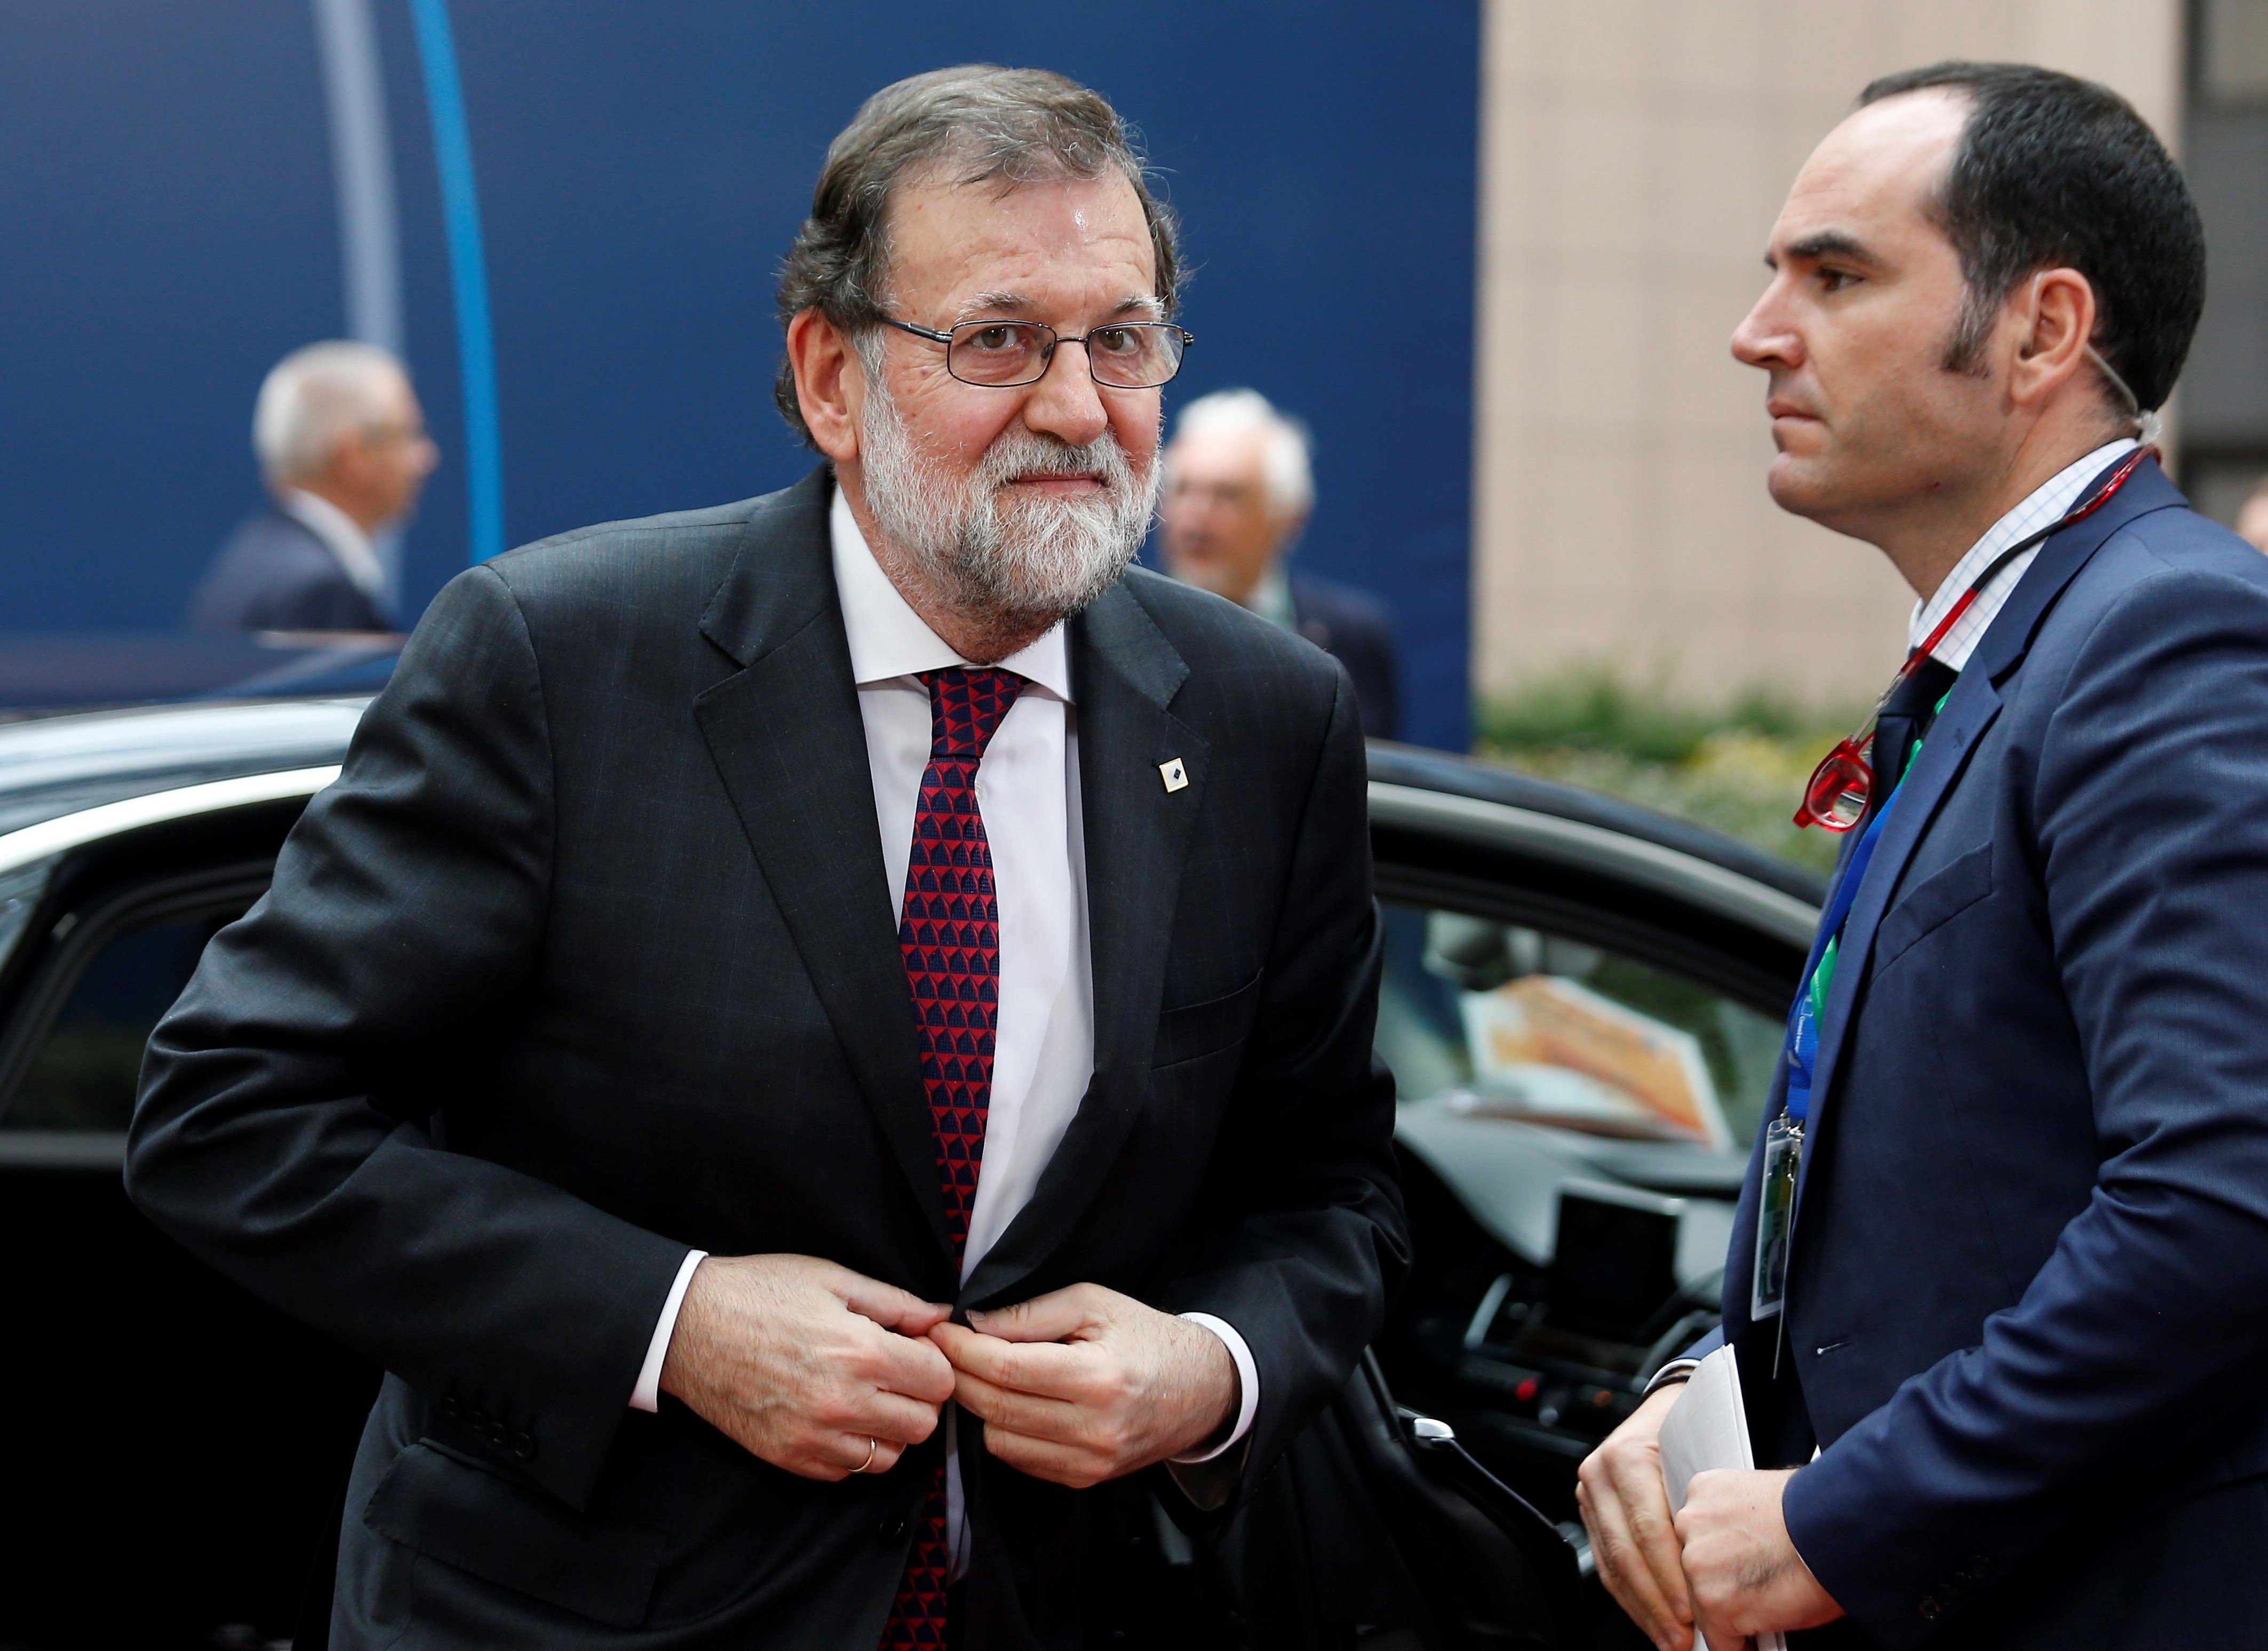 Strong letter from Spanish government to Belgium over Catalonia: "We've taken note"